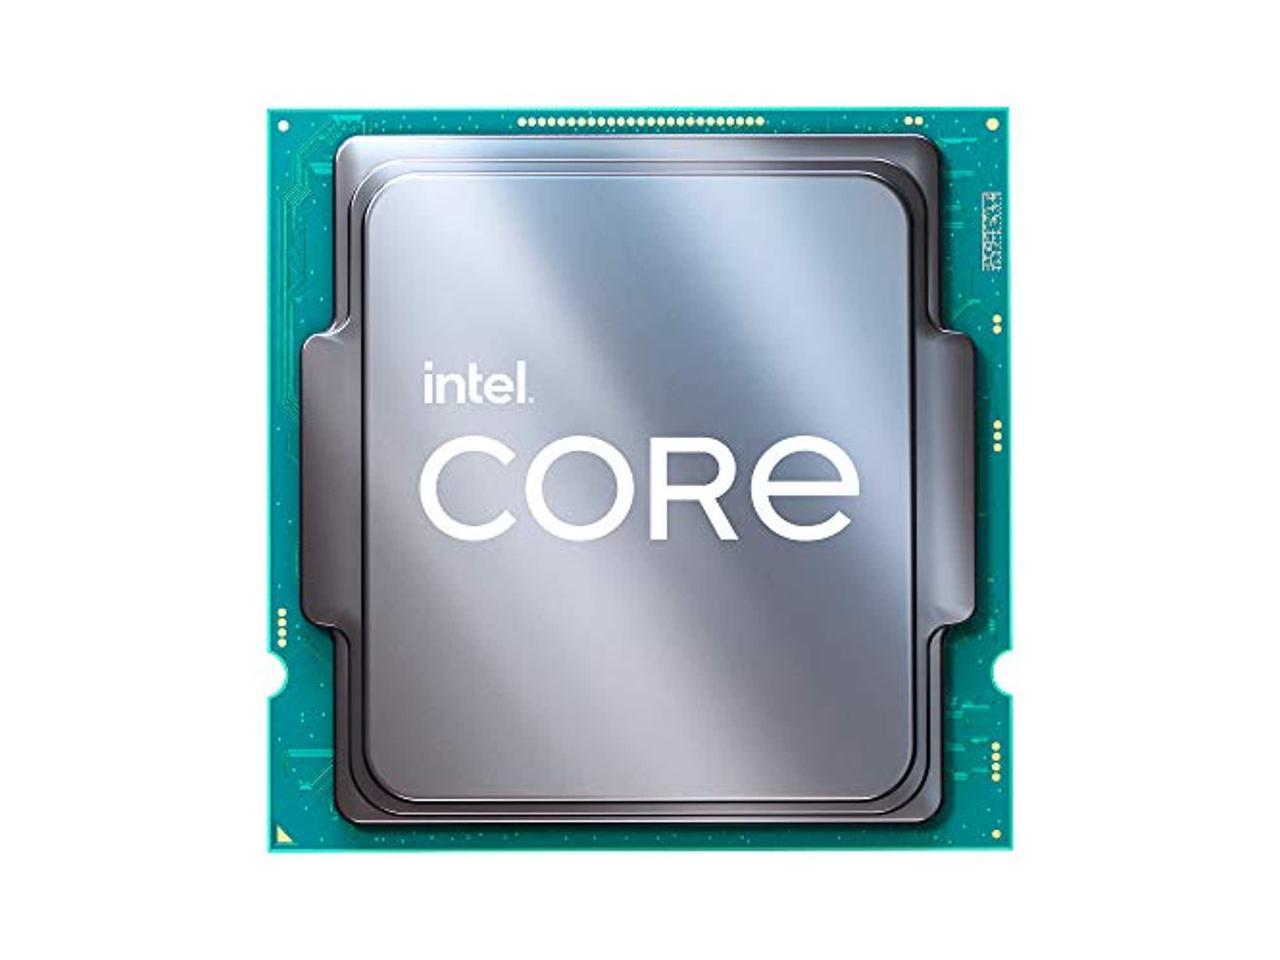 Intel Core i5-11600 Desktop Processor 6 Cores up to 4.8 GHz LGA1200 (Intel  500 Series and Select 400 Series Chipset) 65W (i5-11600)